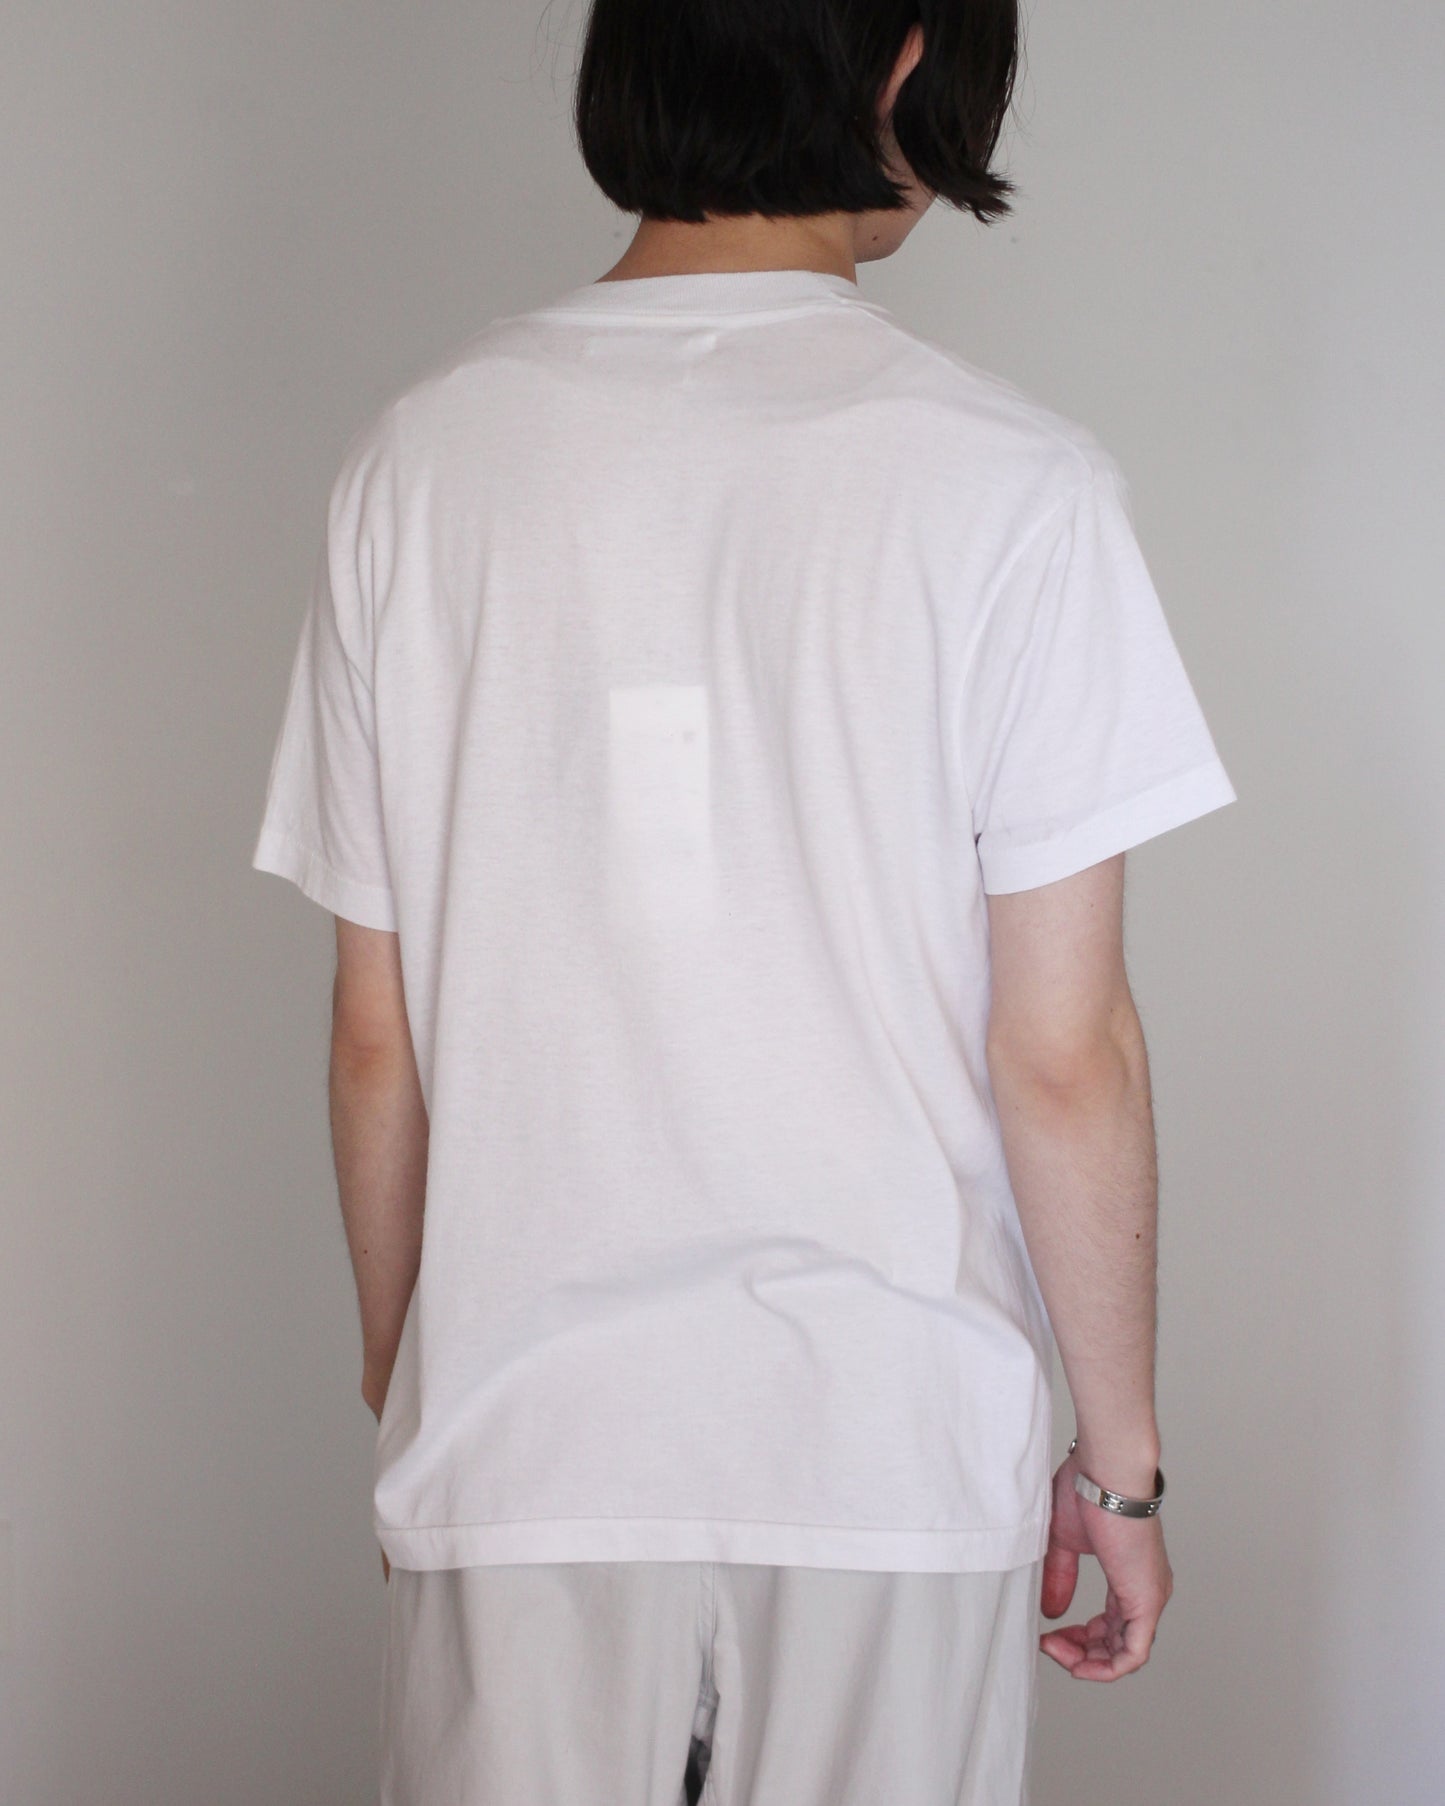 seven by seven（セブンバイセブン）REWORK EMBROIDERY TEE "assort①"